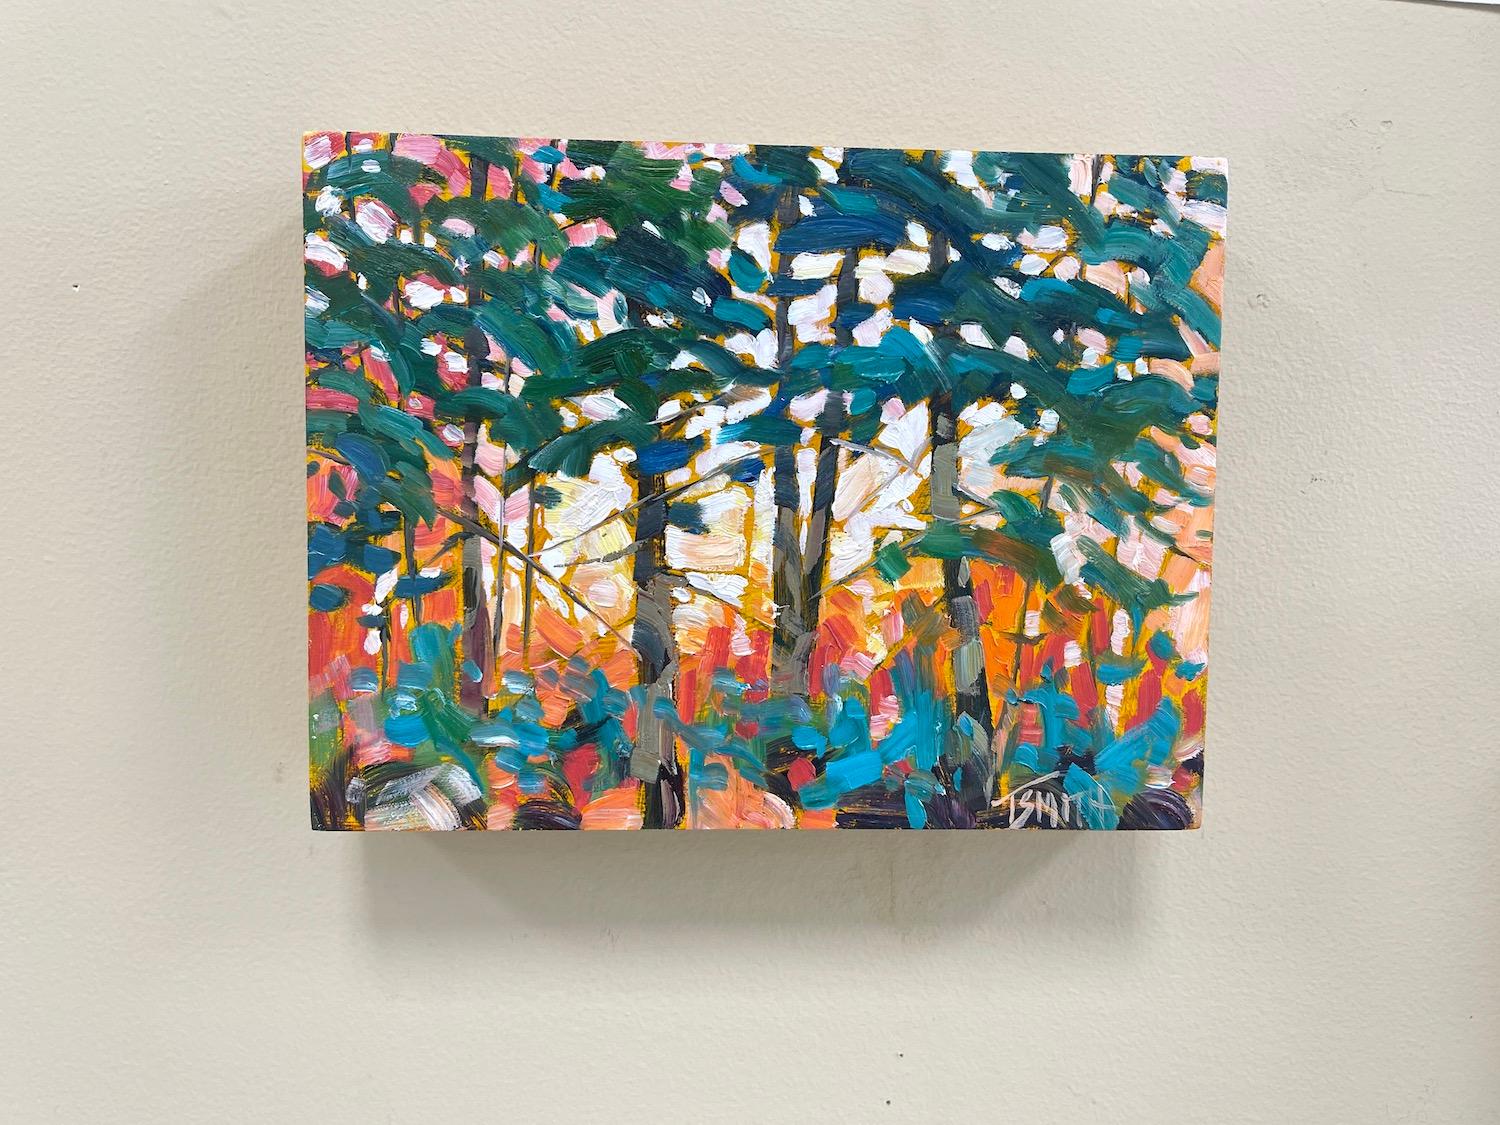 <p>Artist Comments<br>Artist Teresa Smith paints a colorful view of a forest. A stand of trees abundantly towers skyward. Teresa captures the feeling of walking in the woods on a pleasant fall day. 